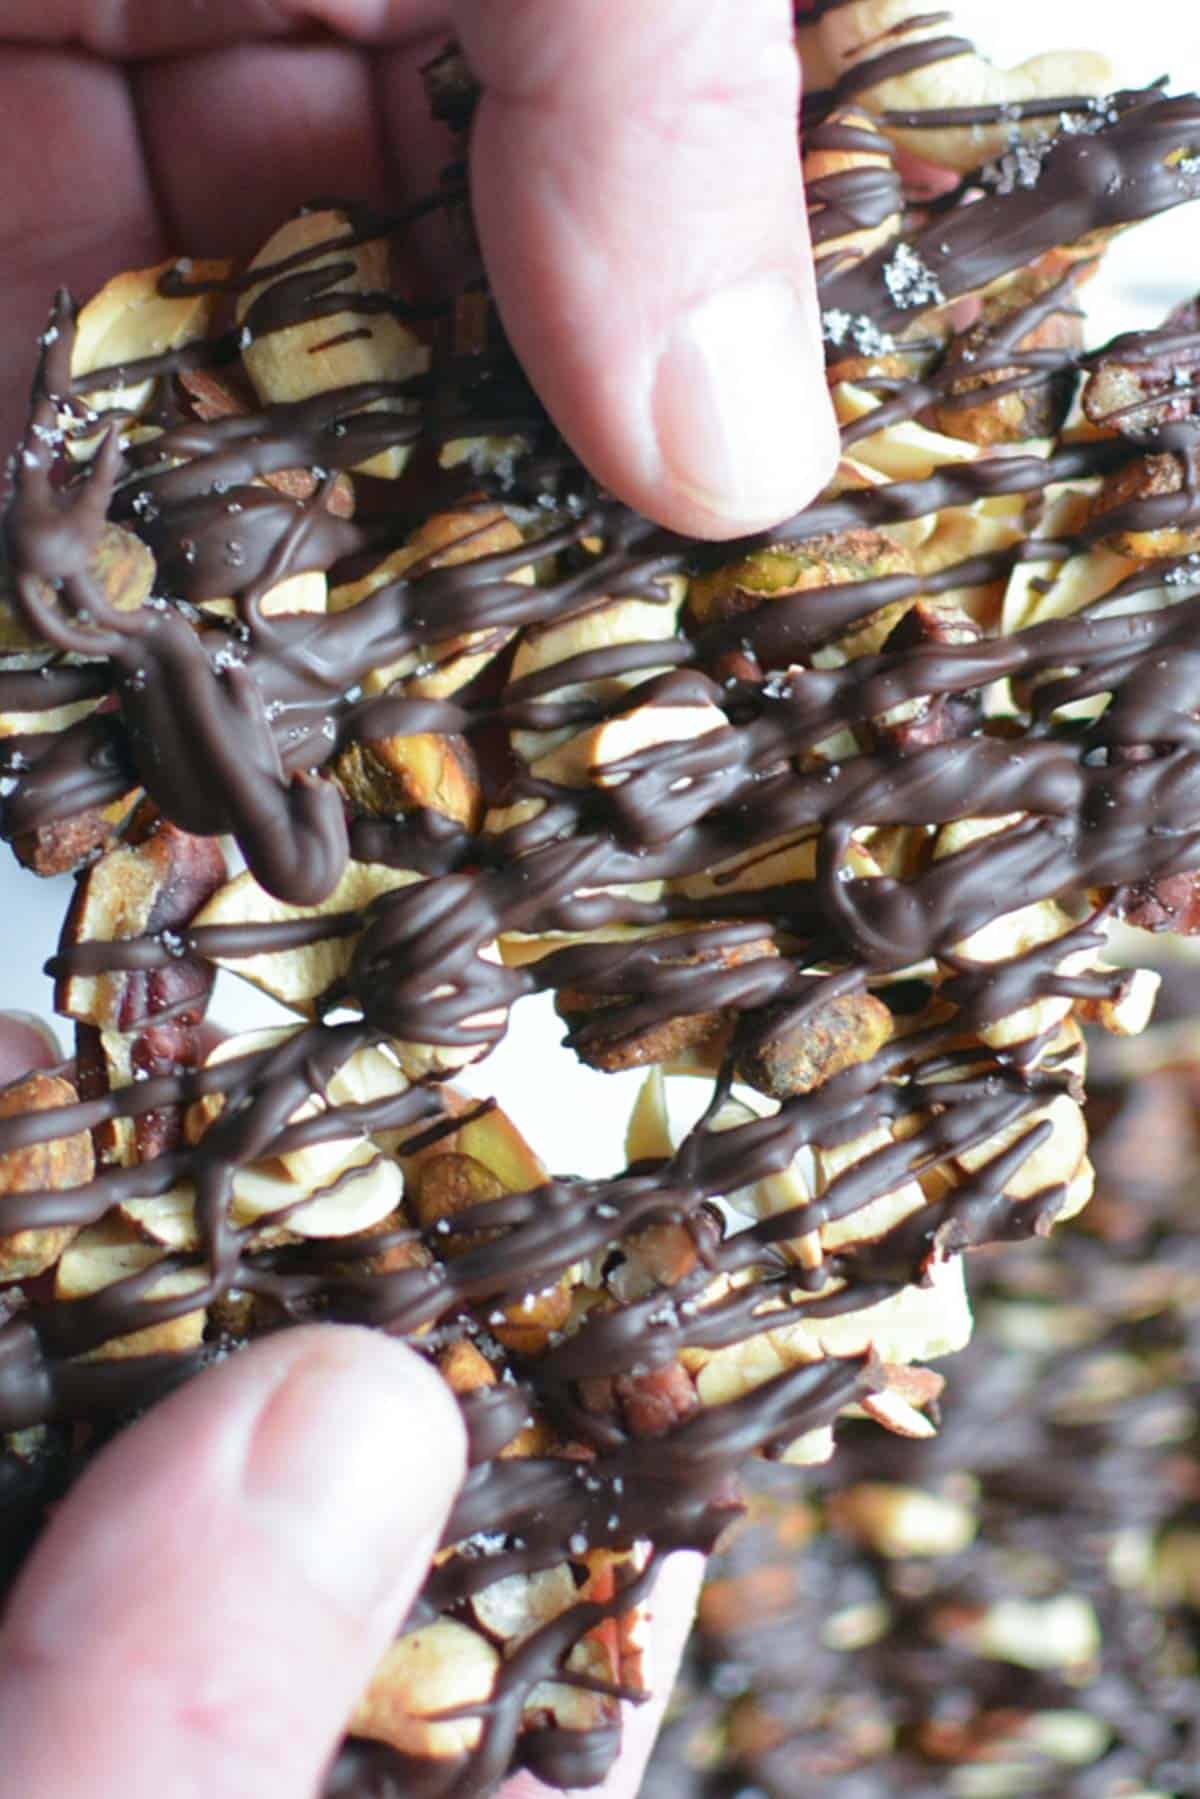 Persons hands breaking chocolate covered nuts into clusters